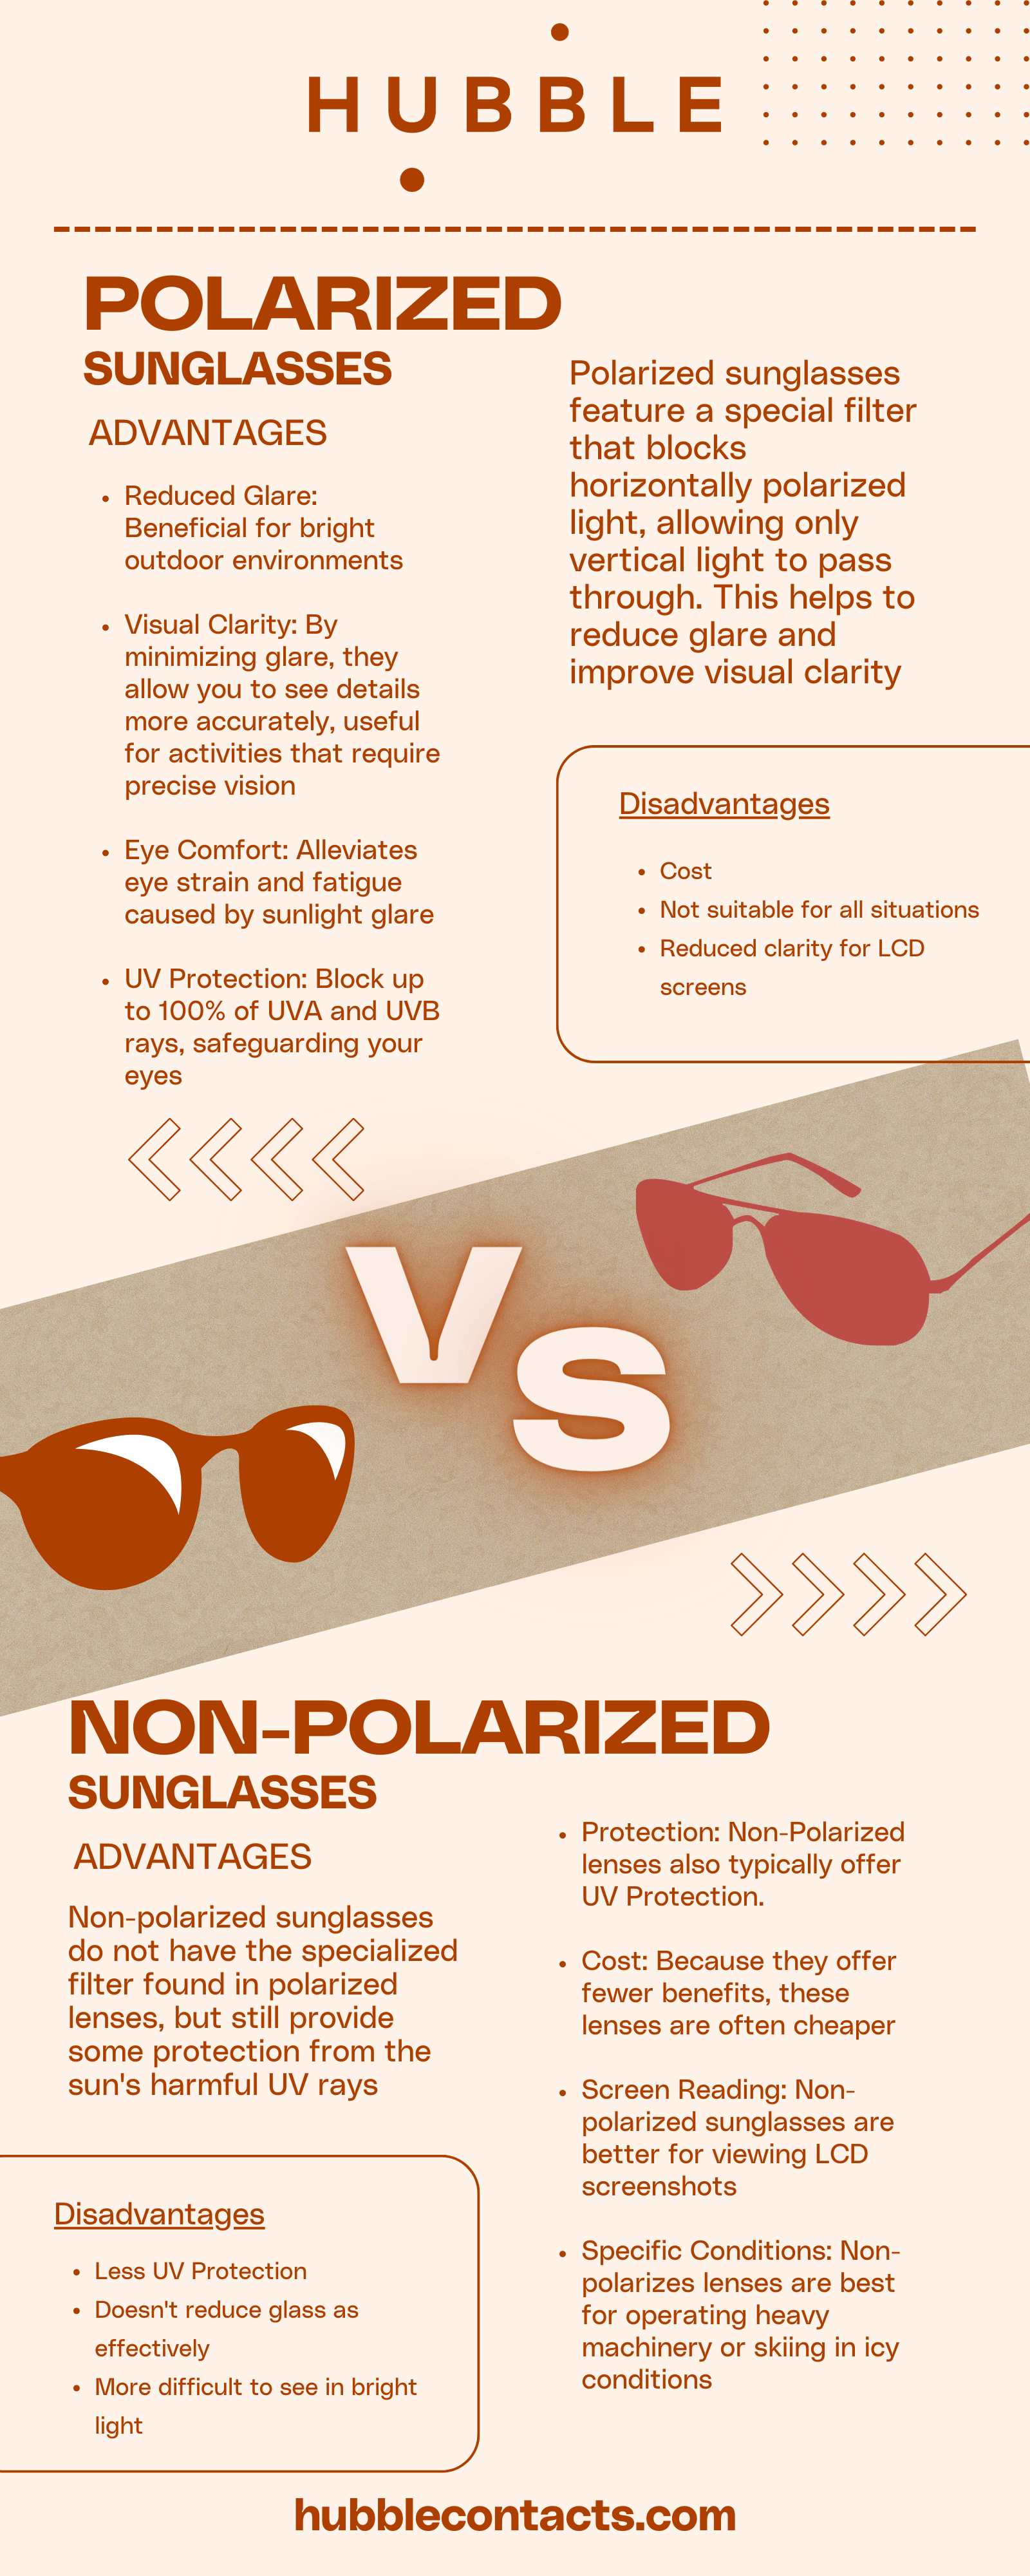 How to Use a Pair of Yellow Polarized Sunglasses